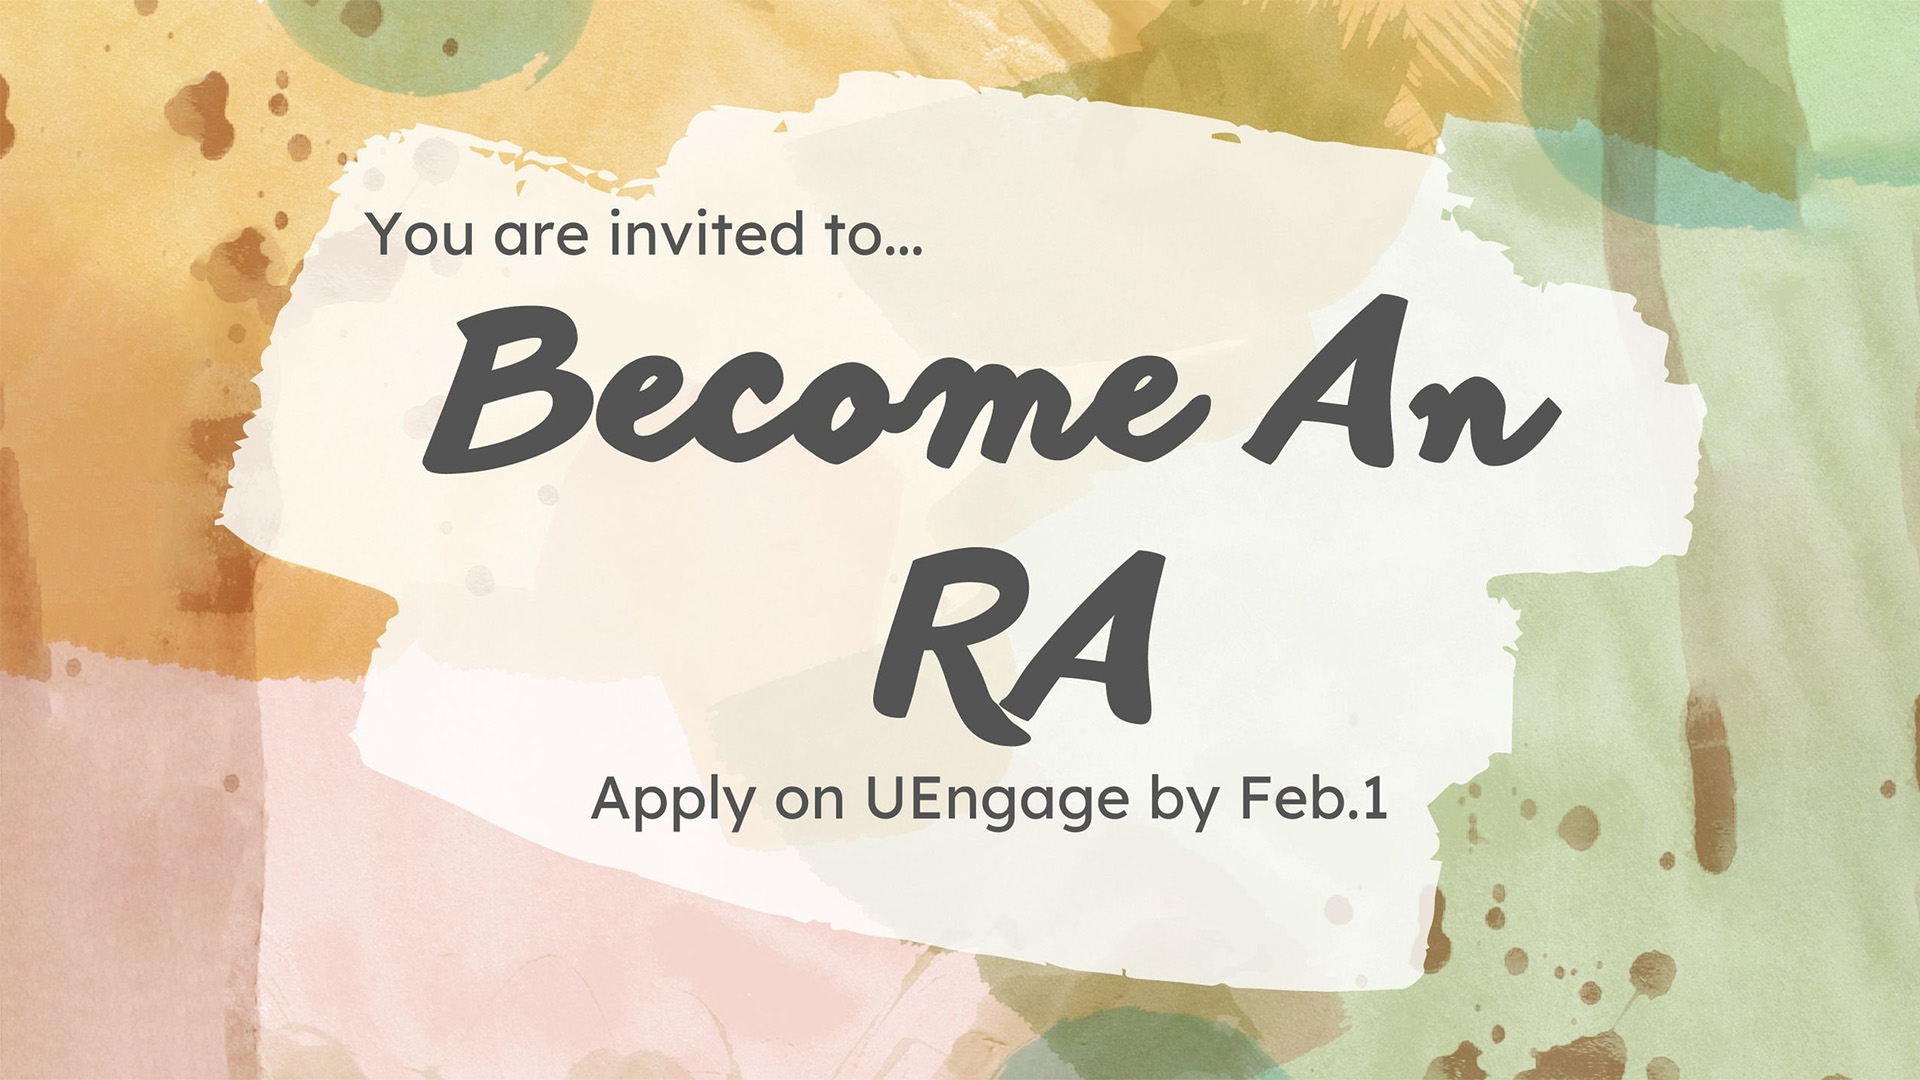 We invite you to Become and RA - Apply on UEngage by February 1